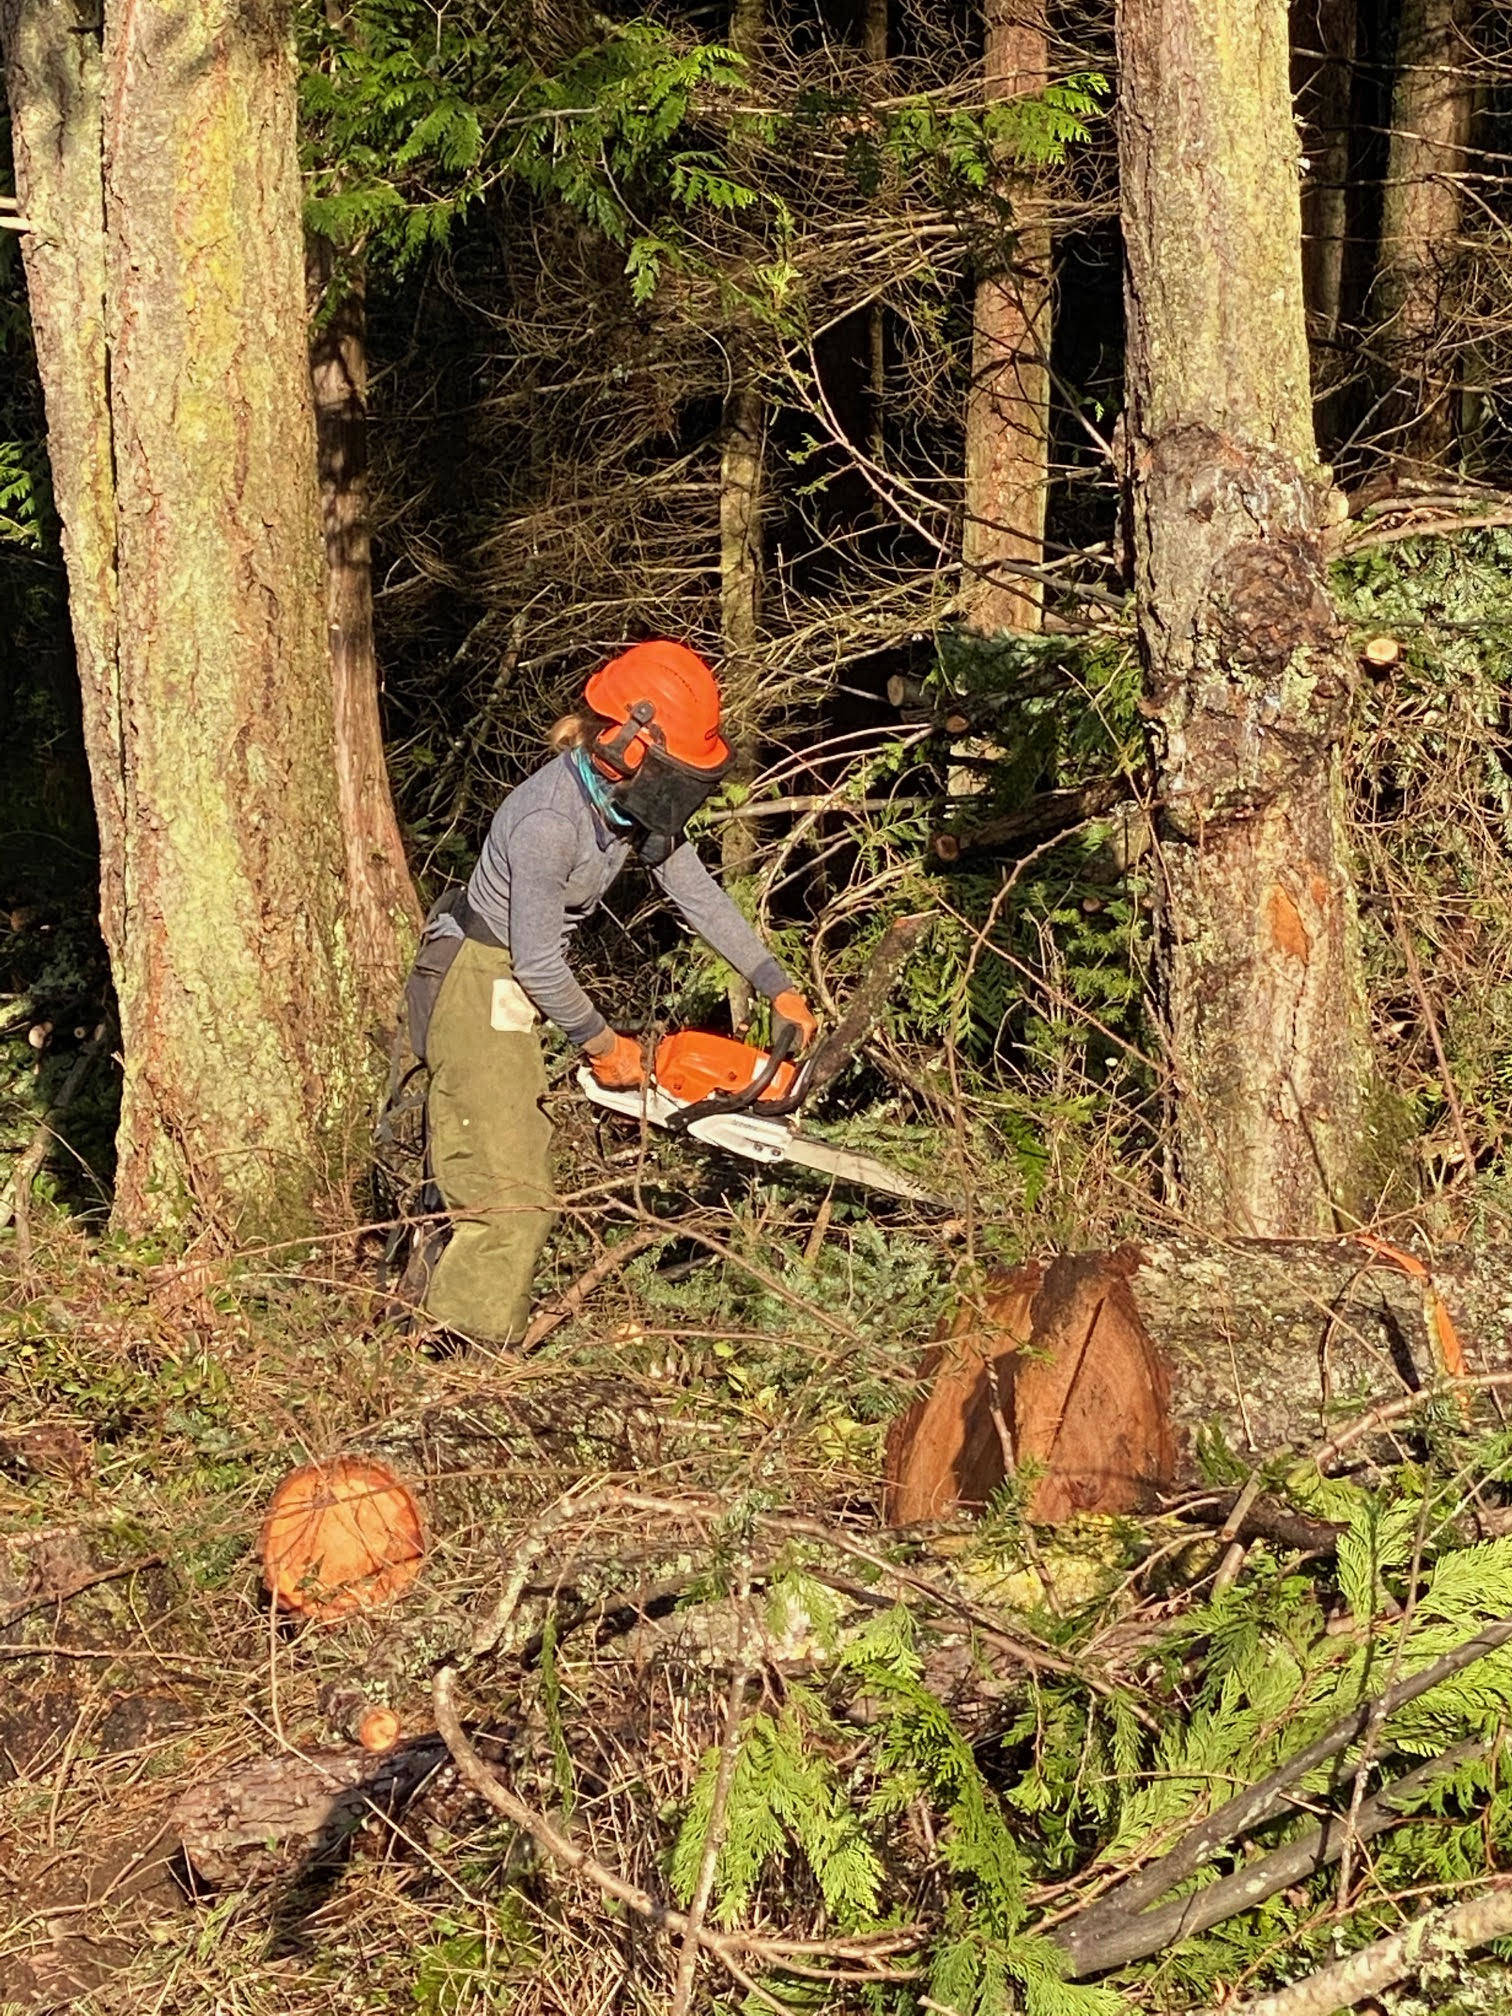 A worker uses a chainsaw to cut woody debris into smaller pieces. (Contributed photo)